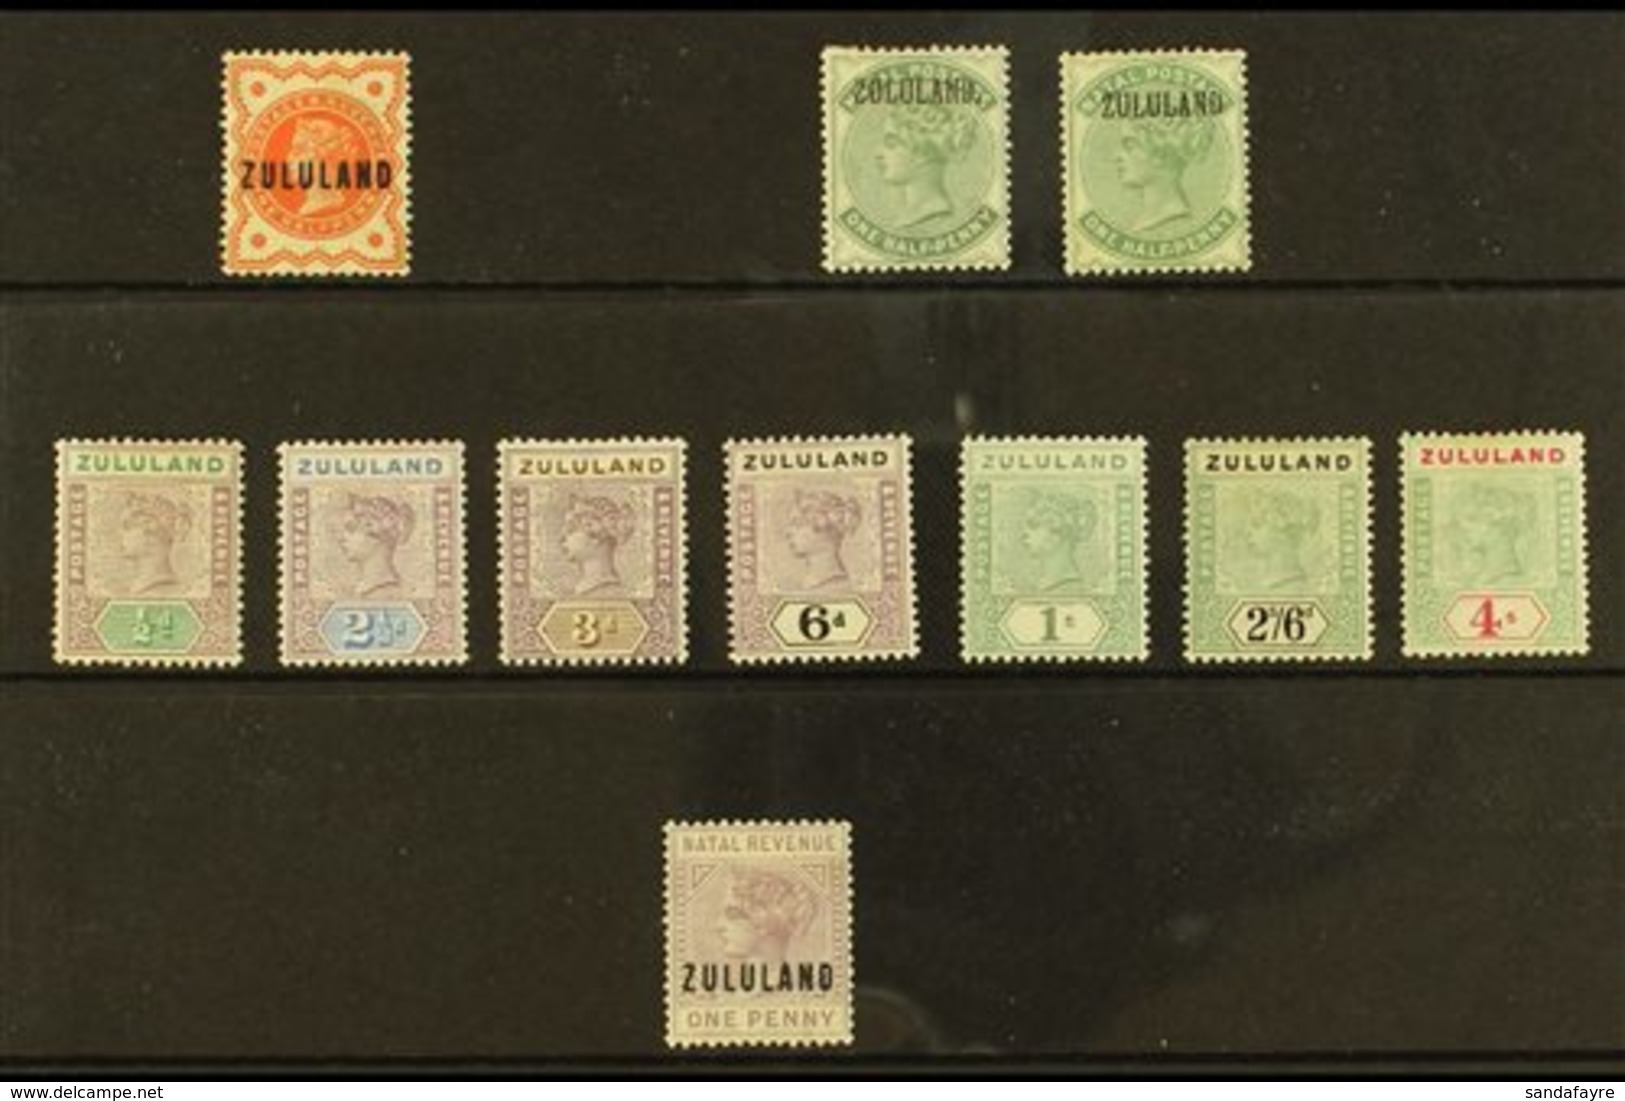 ZULULAND 1888-96 All Different Mint Group With 1888-93 ½d On GB, 1888-93 ½d On Natal Both With Stop And Without Stop, 18 - Unclassified